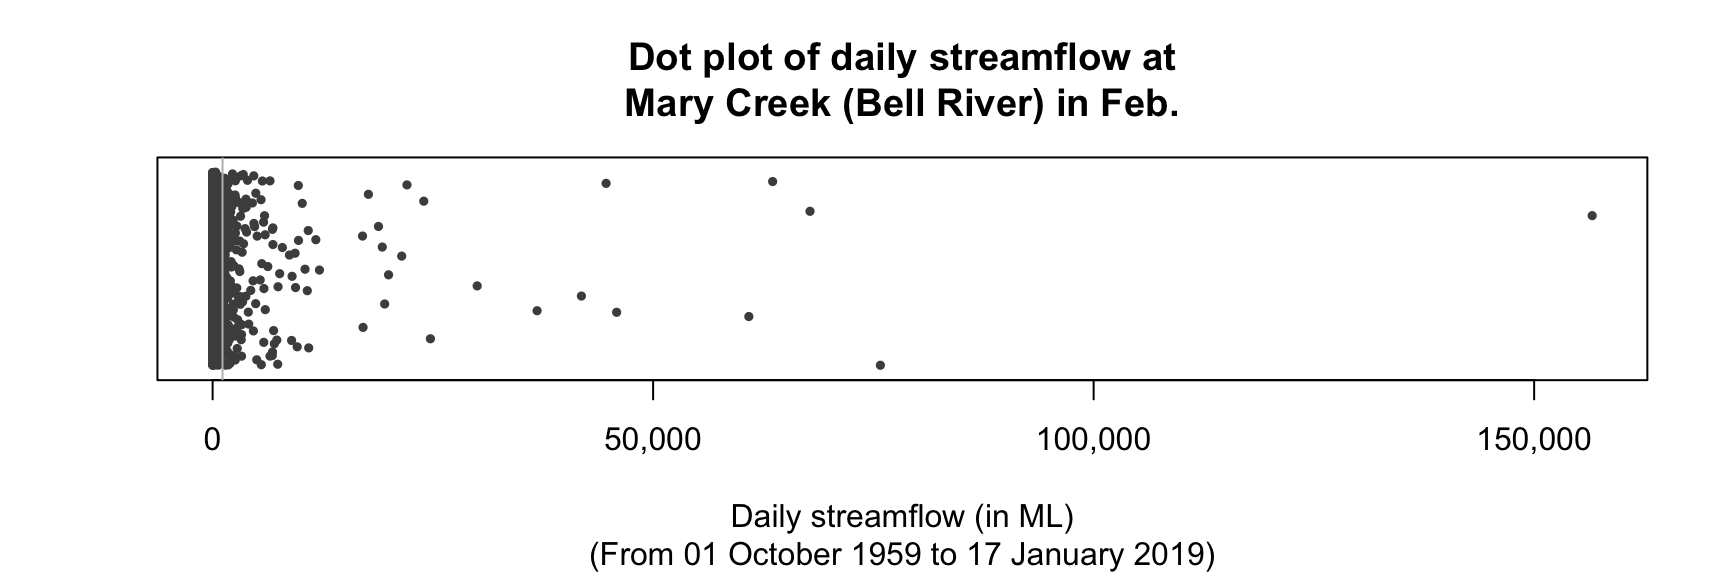 A dot plot of the daily streamflow at Mary River from 1960 to 2017, for February ($n = 1650$). The vertical grey line is the mean value. Many large outliers exist, so the data near zero are all squashed together. Note: values have been jittered in the vertical direction, but overplotting is still present near $0$.\index{Overplotting}